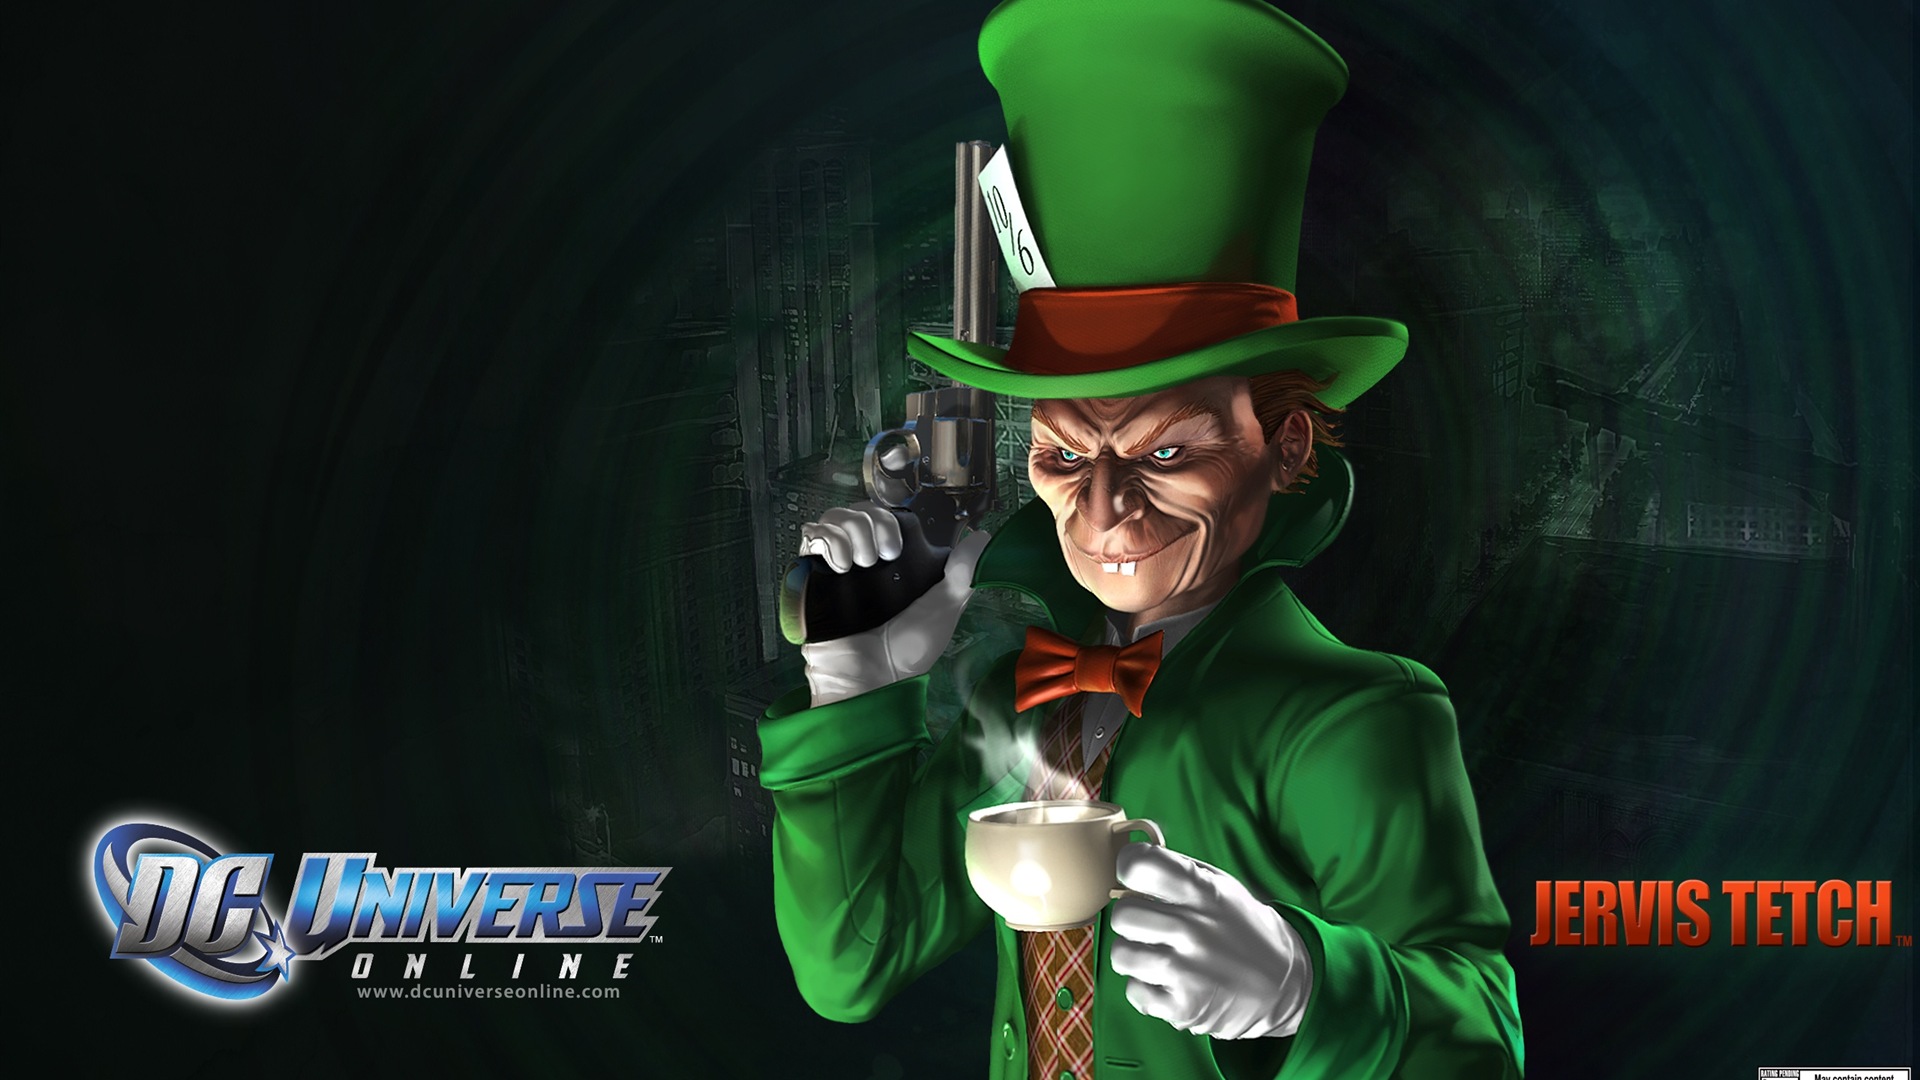 DC Universe Online HD game wallpapers #21 - 1920x1080